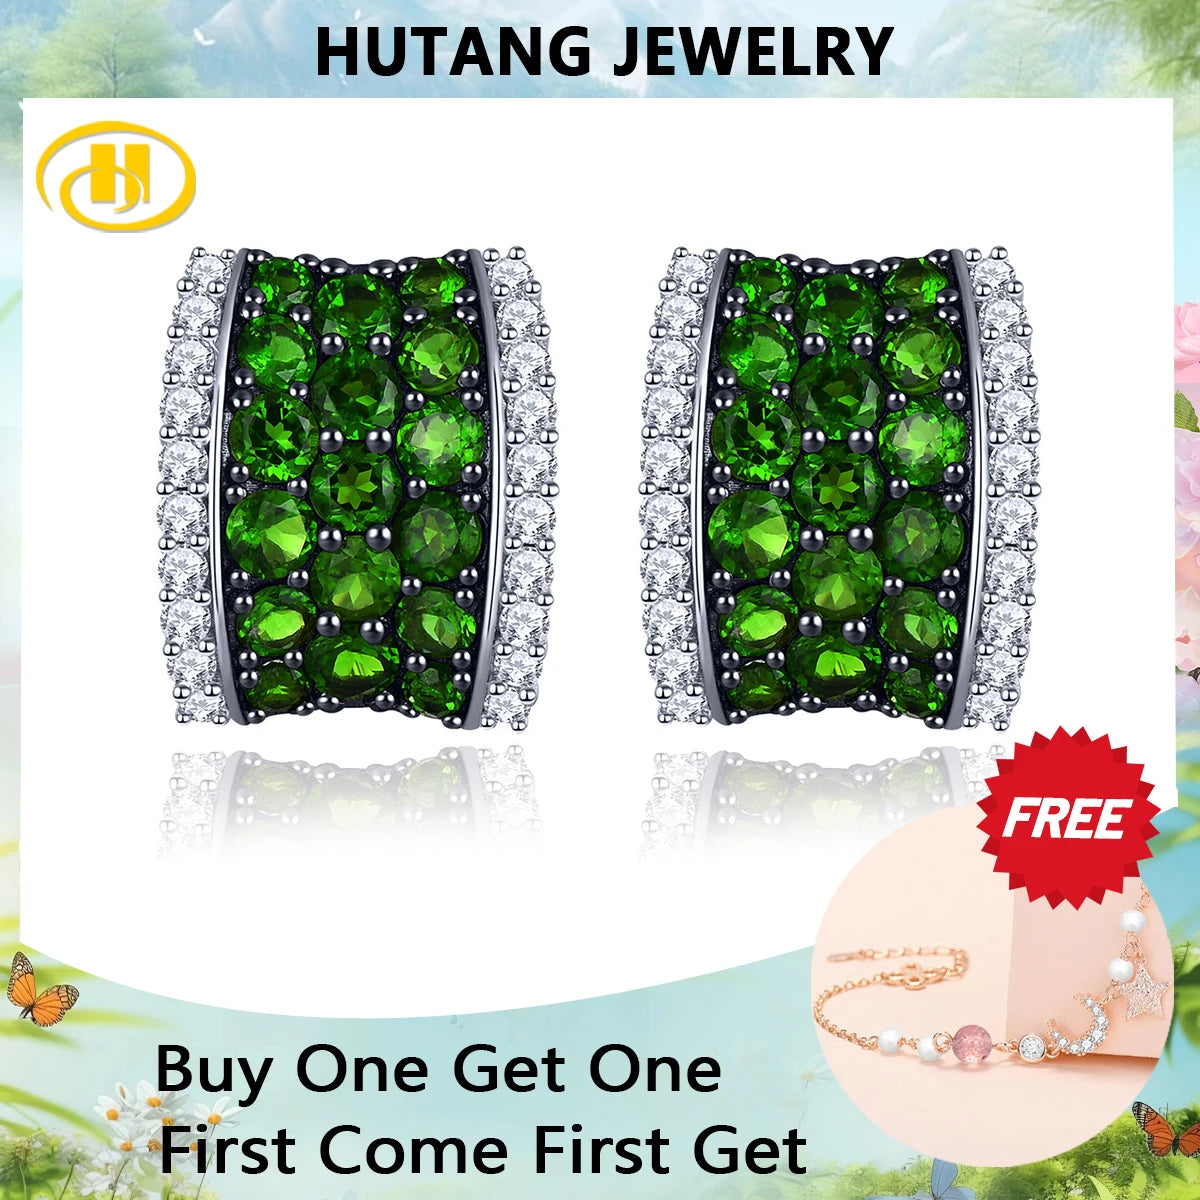 Natural Chrome Diopside Sterling Silver Clip Earring 3.5 Carats Genuine Gemstone Deep Green Women Classic S925 Fine Jewelrys